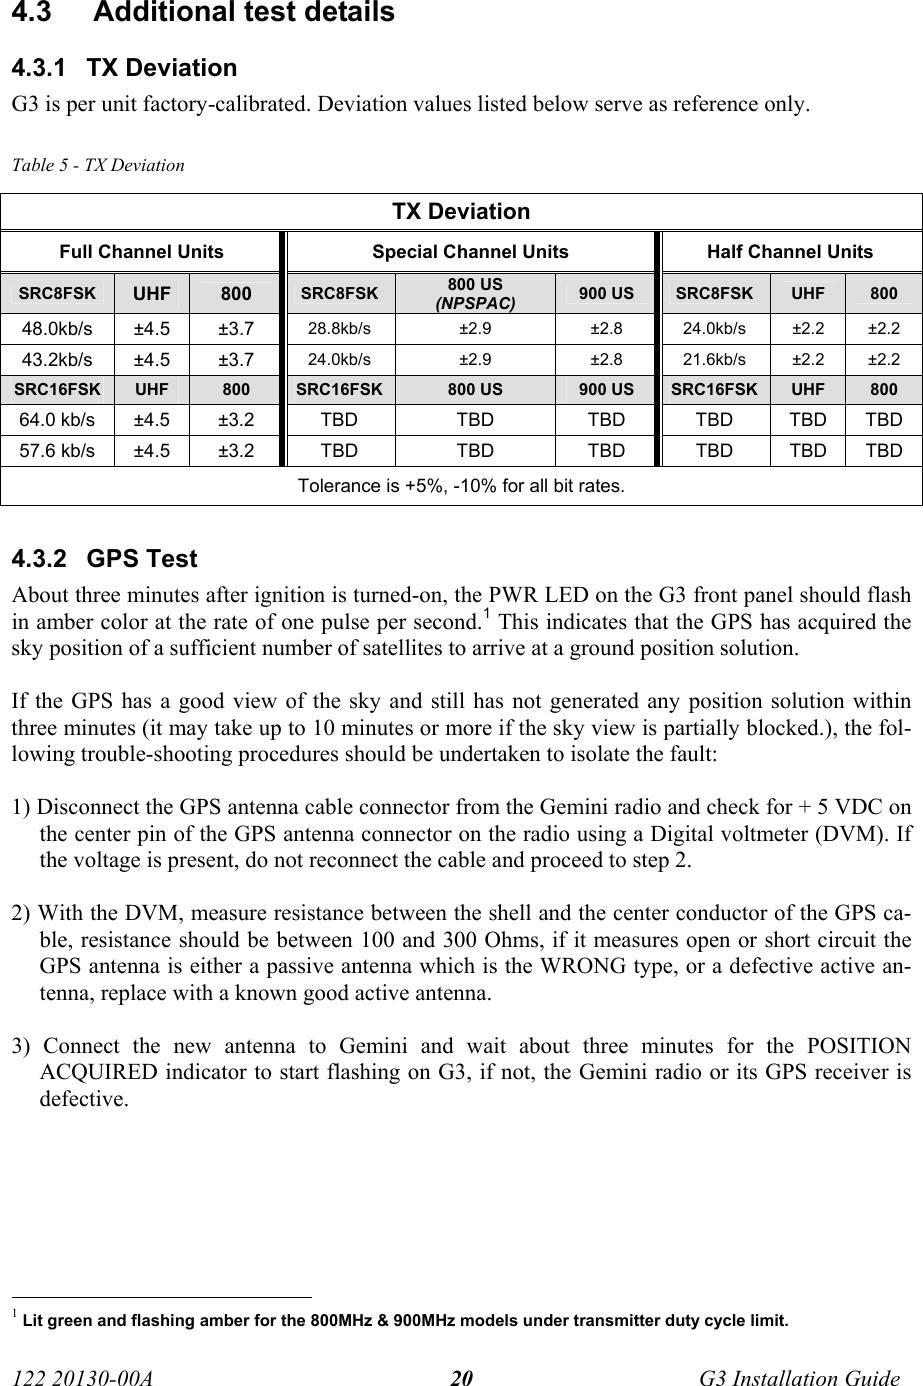  122 20130-00A   G3 Installation Guide 204.3   Additional test details 4.3.1 TX Deviation G3 is per unit factory-calibrated. Deviation values listed below serve as reference only.  Table 5 - TX Deviation TX Deviation Full Channel Units  Special Channel Units  Half Channel Units SRC8FSK  UHF  800   SRC8FSK  800 US (NPSPAC)  900 US  SRC8FSK  UHF  800  48.0kb/s ±4.5  ±3.7  28.8kb/s ±2.9  ±2.8 24.0kb/s ±2.2 ±2.2 43.2kb/s ±4.5  ±3.7  24.0kb/s ±2.9  ±2.8 21.6kb/s ±2.2 ±2.2 SRC16FSK  UHF  800   SRC16FSK  800 US  900 US  SRC16FSK  UHF  800 64.0 kb/s  ±4.5  ±3.2  TBD  TBD  TBD  TBD  TBD  TBD 57.6 kb/s  ±4.5  ±3.2  TBD  TBD TBD TBD TBD TBD Tolerance is +5%, -10% for all bit rates. 4.3.2 GPS Test About three minutes after ignition is turned-on, the PWR LED on the G3 front panel should flash in amber color at the rate of one pulse per second.1 This indicates that the GPS has acquired the sky position of a sufficient number of satellites to arrive at a ground position solution.  If the GPS has a good view of the sky and still has not generated any position solution within three minutes (it may take up to 10 minutes or more if the sky view is partially blocked.), the fol-lowing trouble-shooting procedures should be undertaken to isolate the fault:  1) Disconnect the GPS antenna cable connector from the Gemini radio and check for + 5 VDC on the center pin of the GPS antenna connector on the radio using a Digital voltmeter (DVM). If the voltage is present, do not reconnect the cable and proceed to step 2.  2) With the DVM, measure resistance between the shell and the center conductor of the GPS ca-ble, resistance should be between 100 and 300 Ohms, if it measures open or short circuit the GPS antenna is either a passive antenna which is the WRONG type, or a defective active an-tenna, replace with a known good active antenna.  3) Connect the new antenna to Gemini and wait about three minutes for the POSITION ACQUIRED indicator to start flashing on G3, if not, the Gemini radio or its GPS receiver is defective.                                                       1 Lit green and flashing amber for the 800MHz &amp; 900MHz models under transmitter duty cycle limit. 